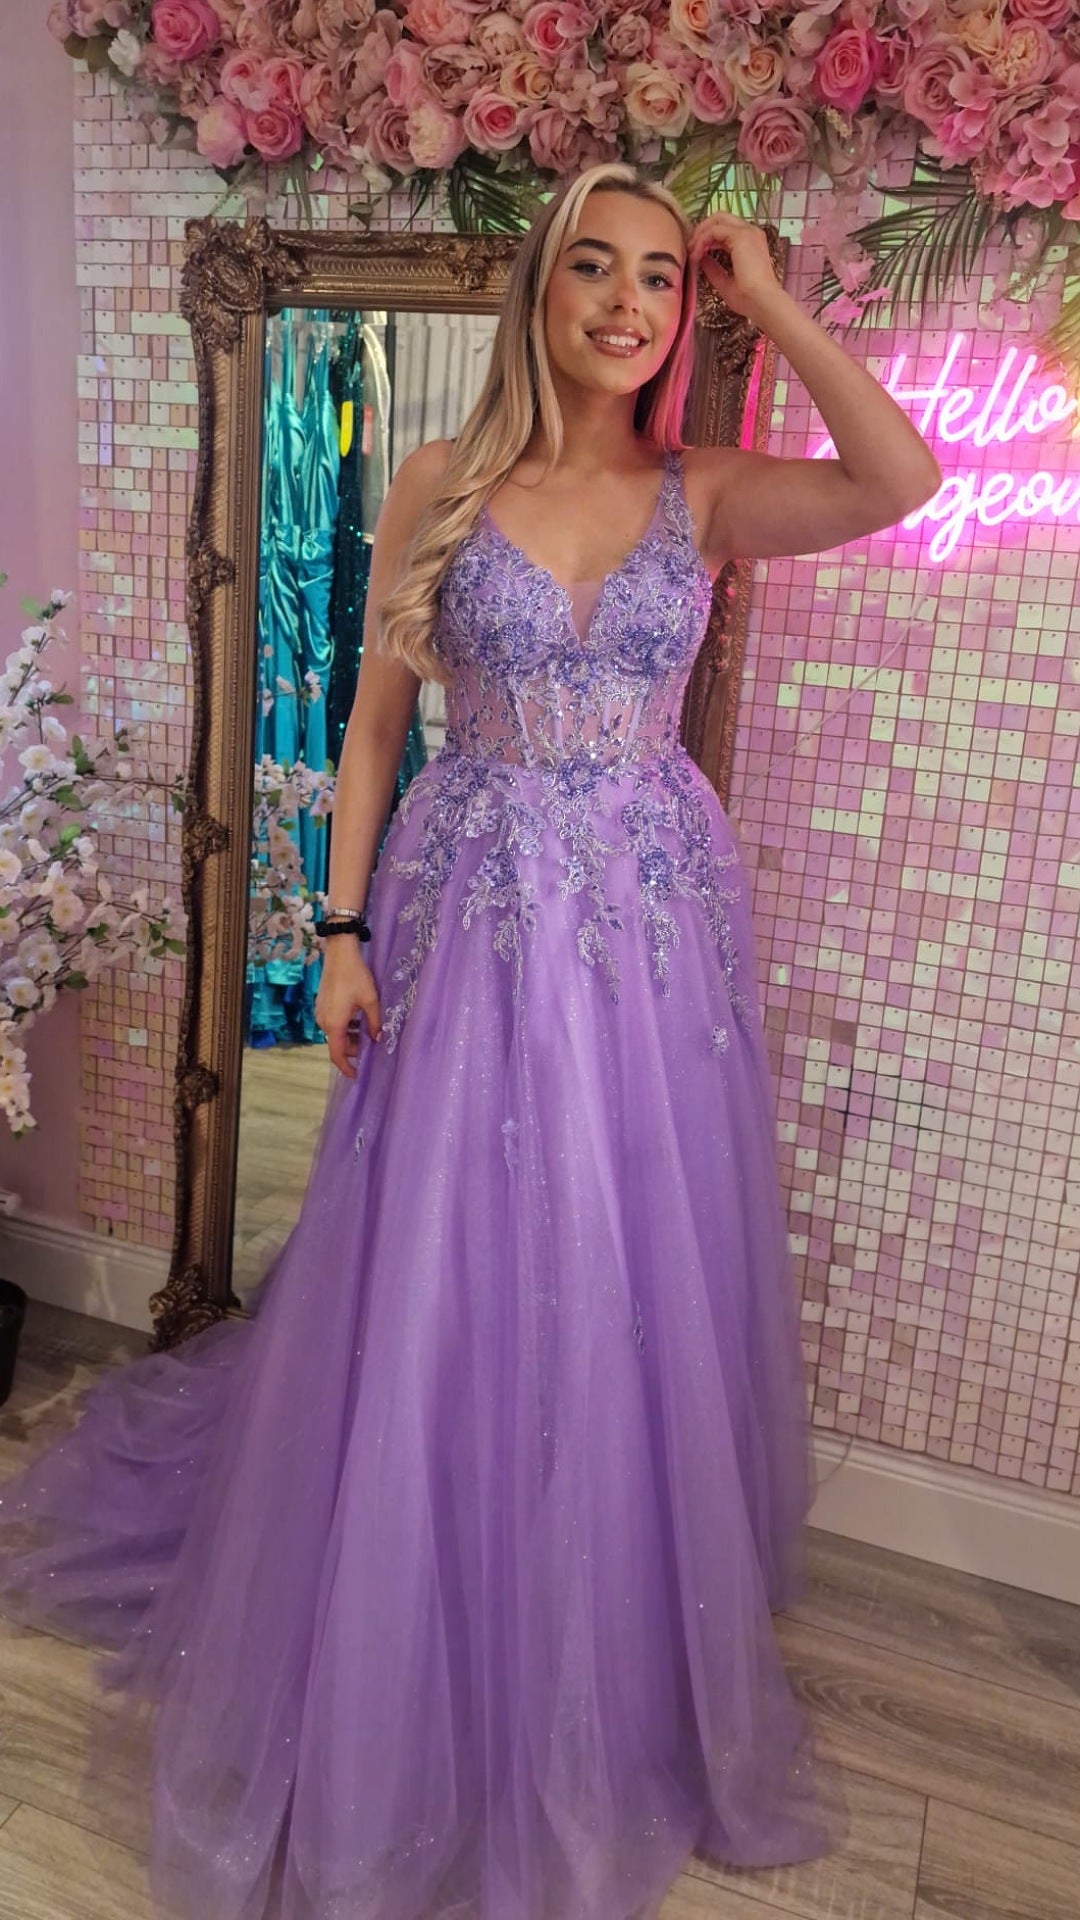 Taylor Lilac Embellished Corset Flower Detail Ball Gown Formal Prom Dress